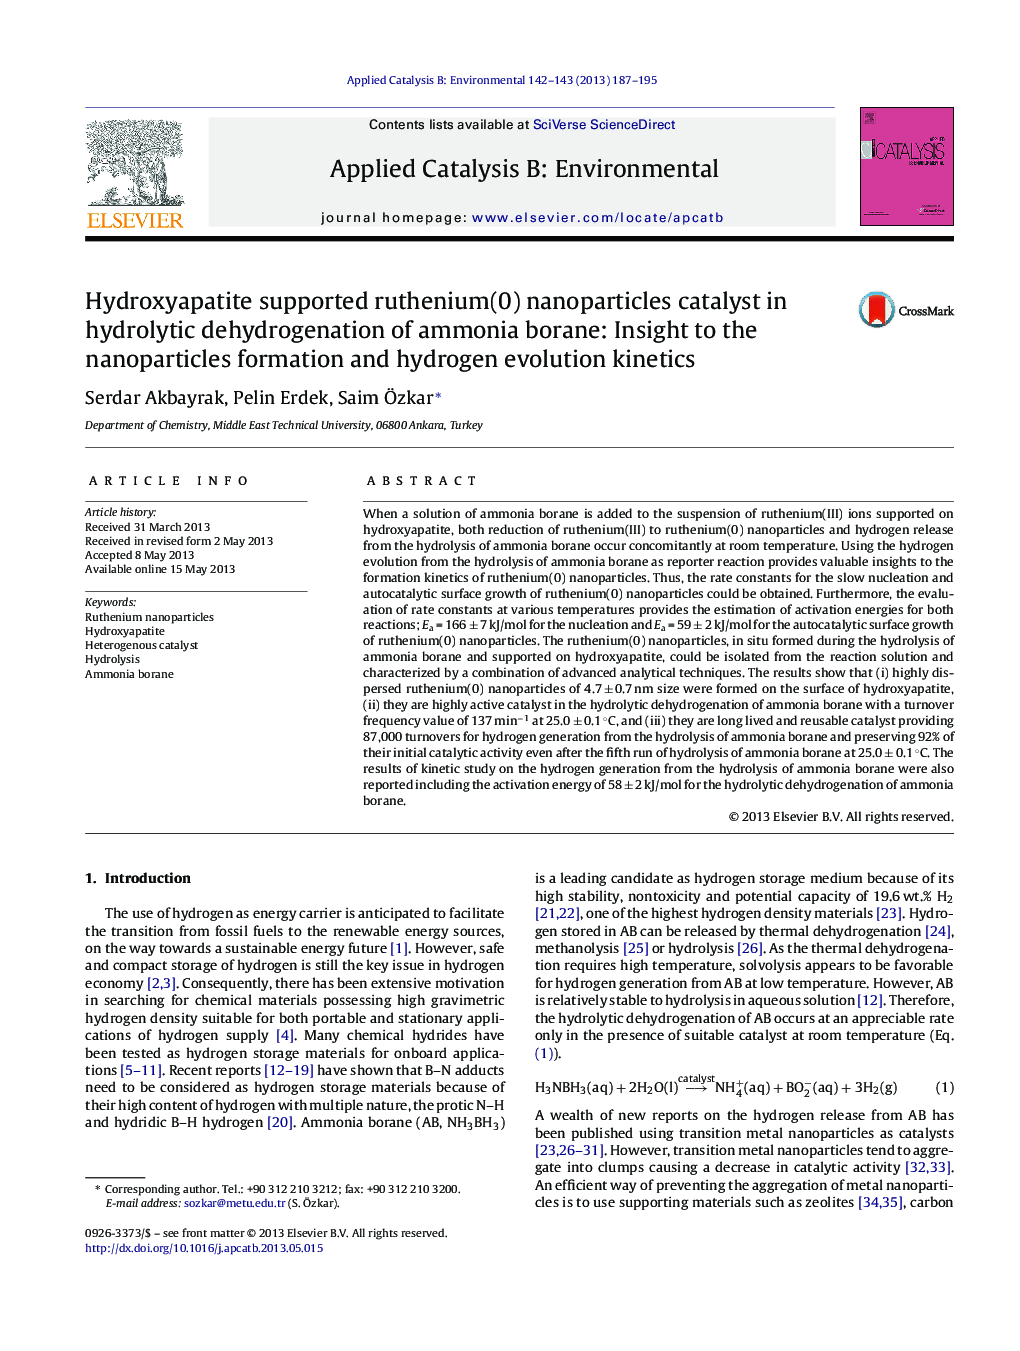 Hydroxyapatite supported ruthenium(0) nanoparticles catalyst in hydrolytic dehydrogenation of ammonia borane: Insight to the nanoparticles formation and hydrogen evolution kinetics